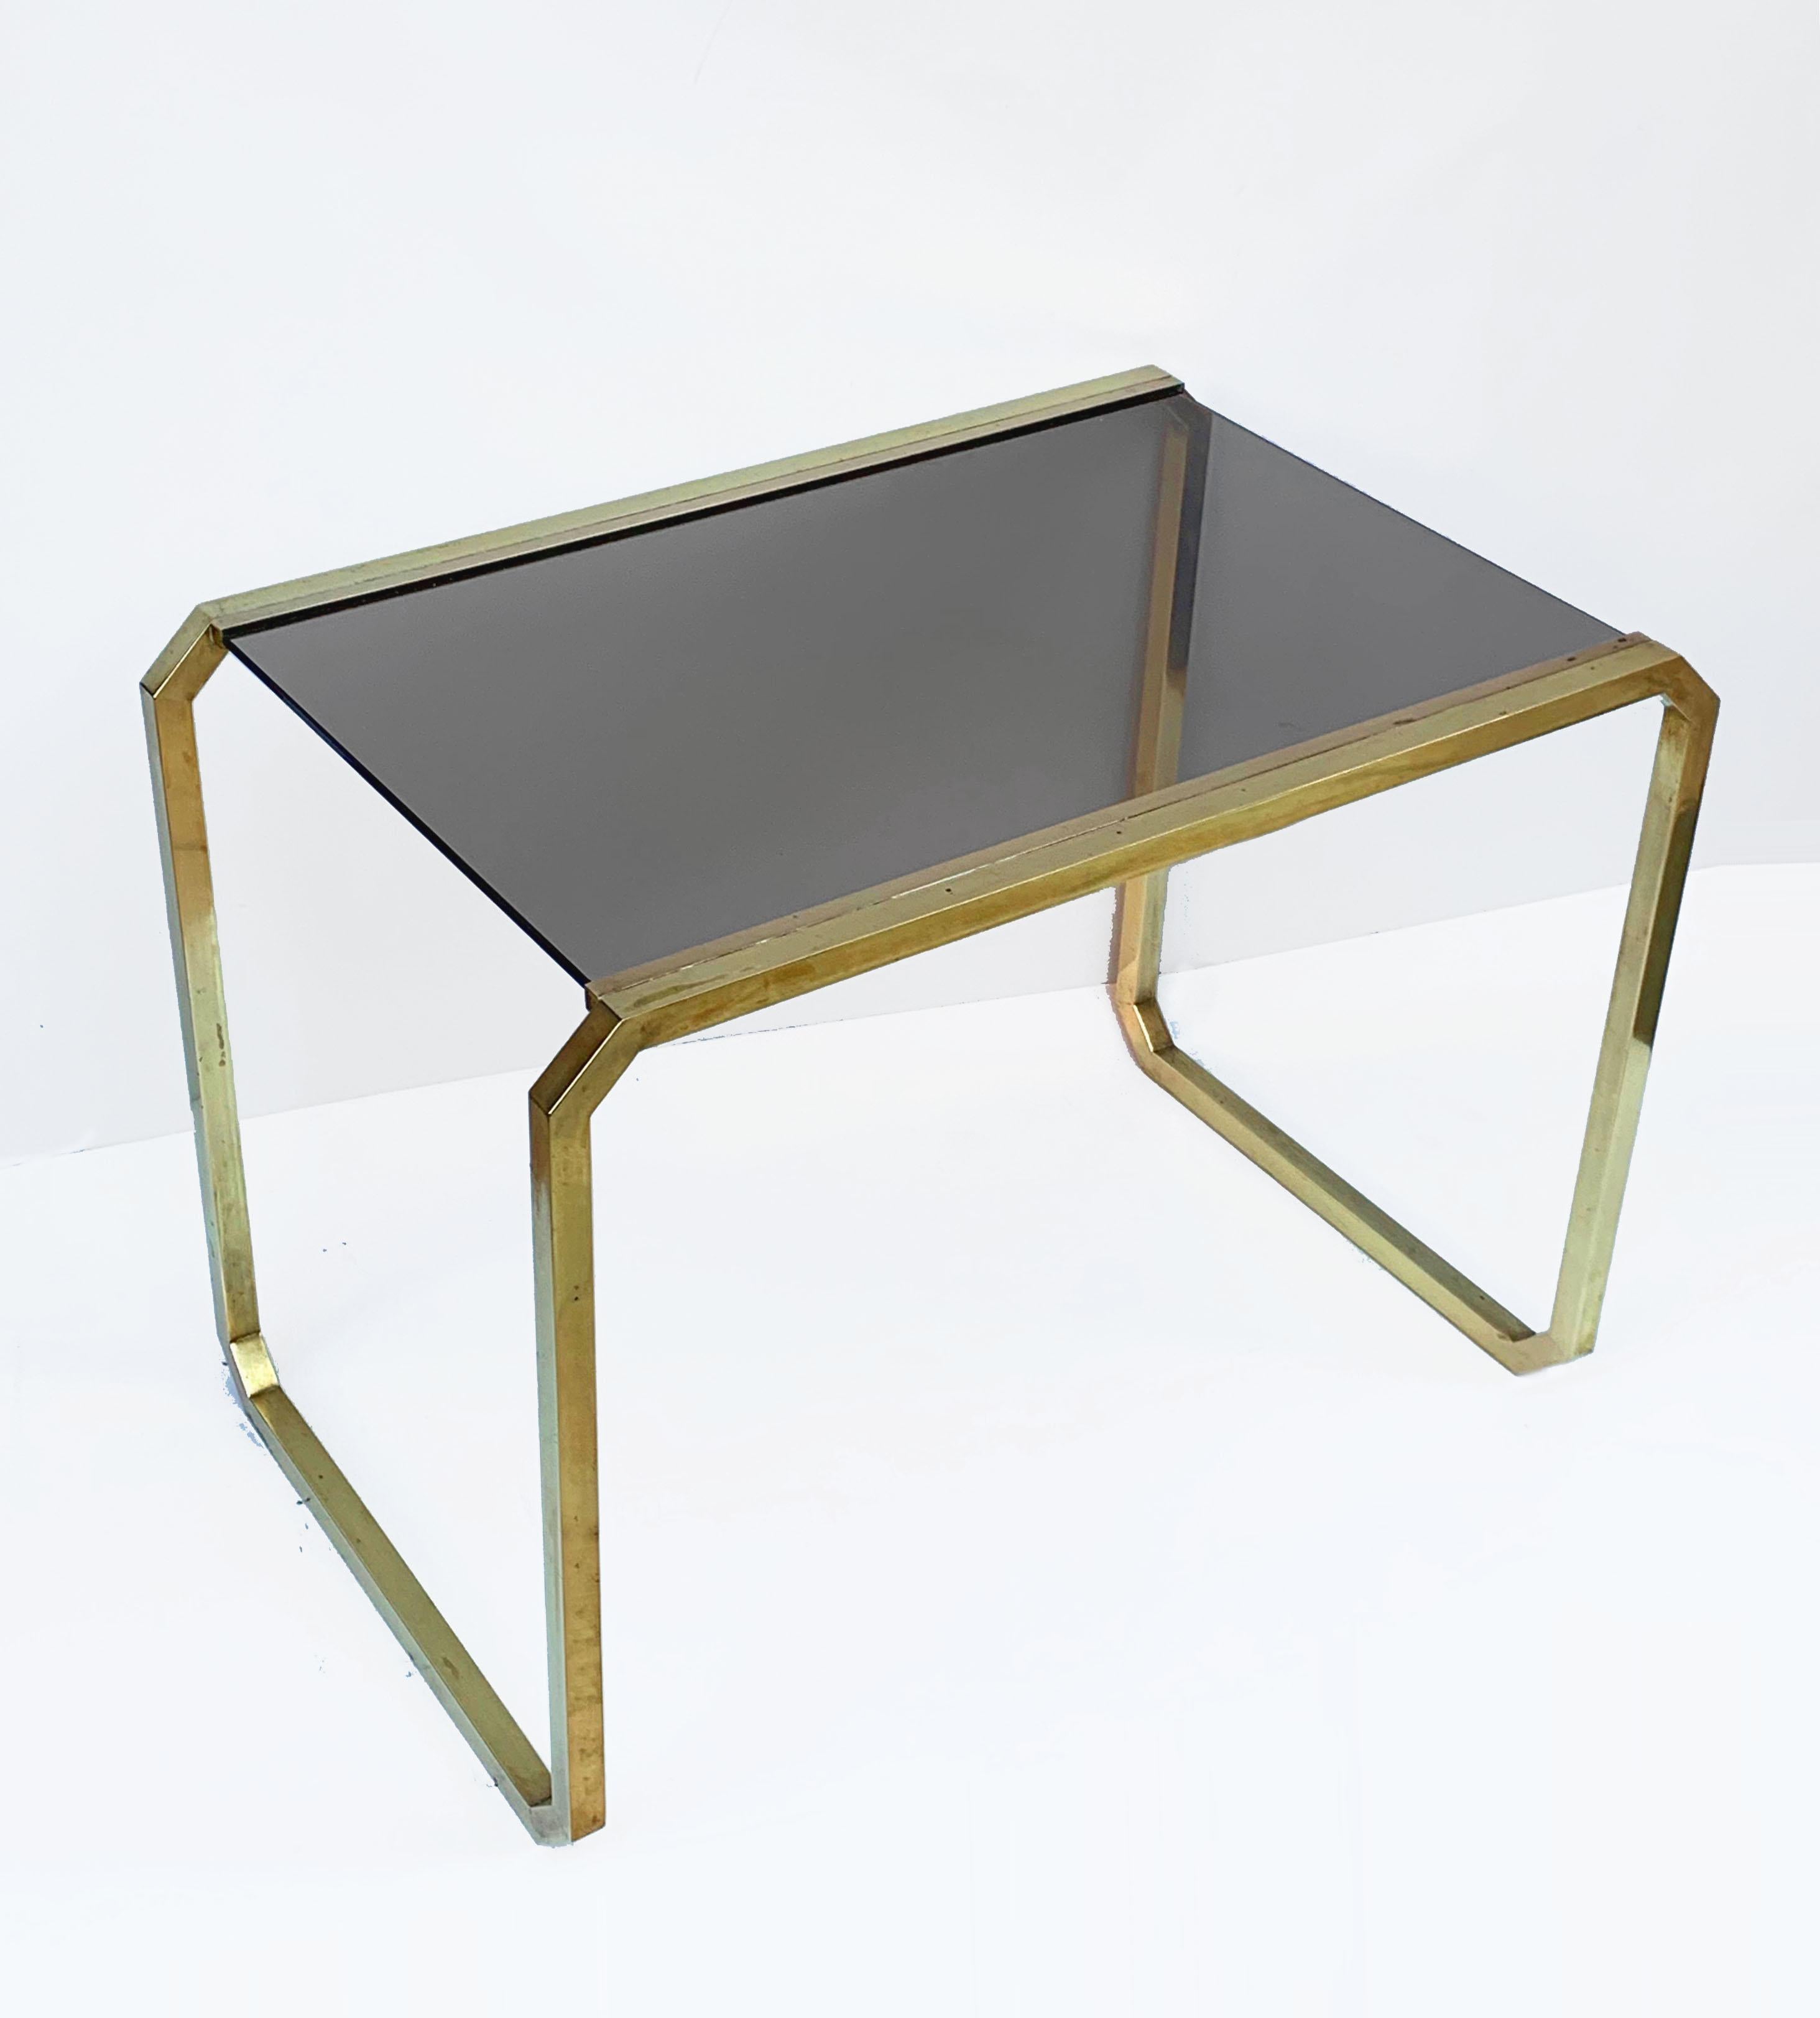 Elegant coffee table in brass, smoked glass adds to the seductive elegance of this midcentury piece.
Measurements: 56 x 36 H 41.